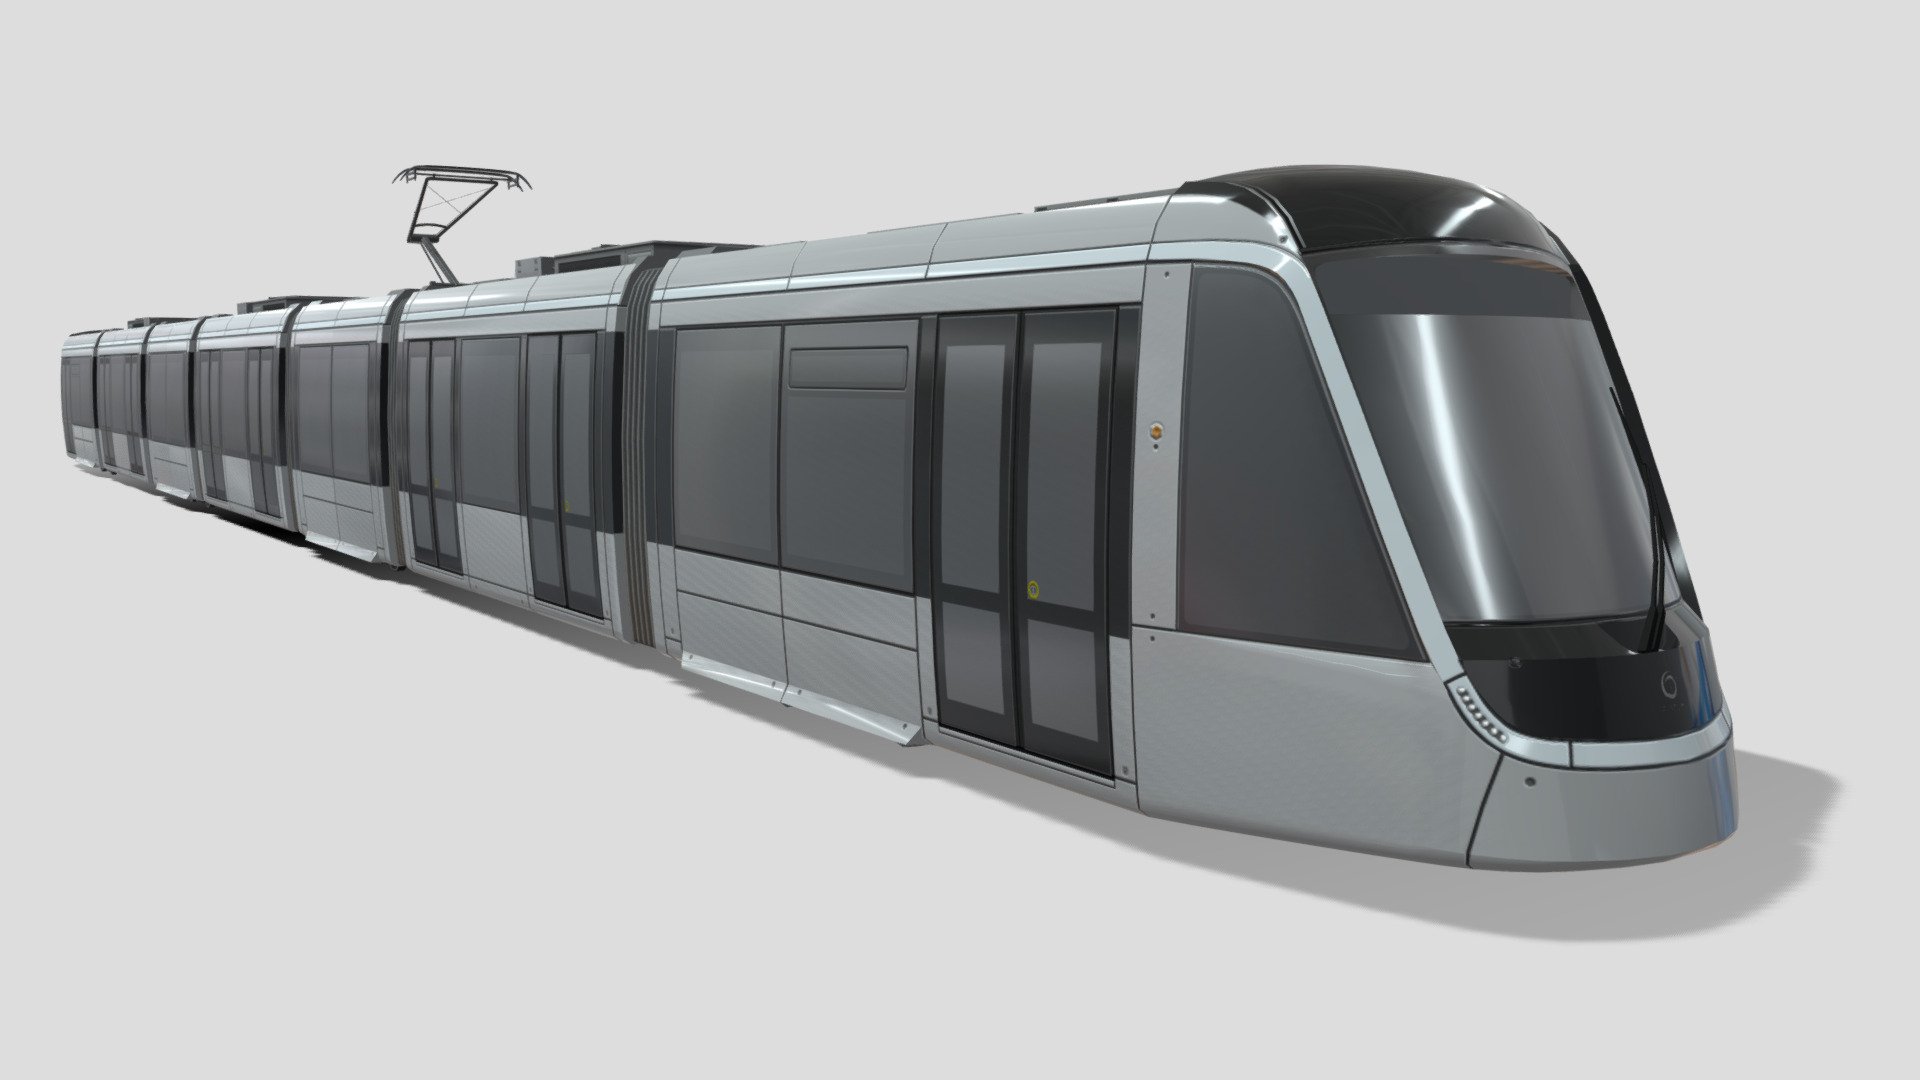 Île-de-France tramway Line 9 (simply T9) is a tram line which is a part of the modern tram network of Paris. The line opened to the public on 10 April 2021, and is serviced by the modern low-floor Alstom Citadis X05 trams.

This model was originally made as an asset for the game Cities: Skylines. There are some minor simplifications to the texture and model to keep it optimised for the game.

Available formats: Wavefront OBJ (.obj), Autodesk FBX (.fbx), STL (.stl)

Made in Blender 3.5 - Alstom Citadis XO5 - Paris T9 Tram - Buy Royalty Free 3D model by Nostrix 3d model